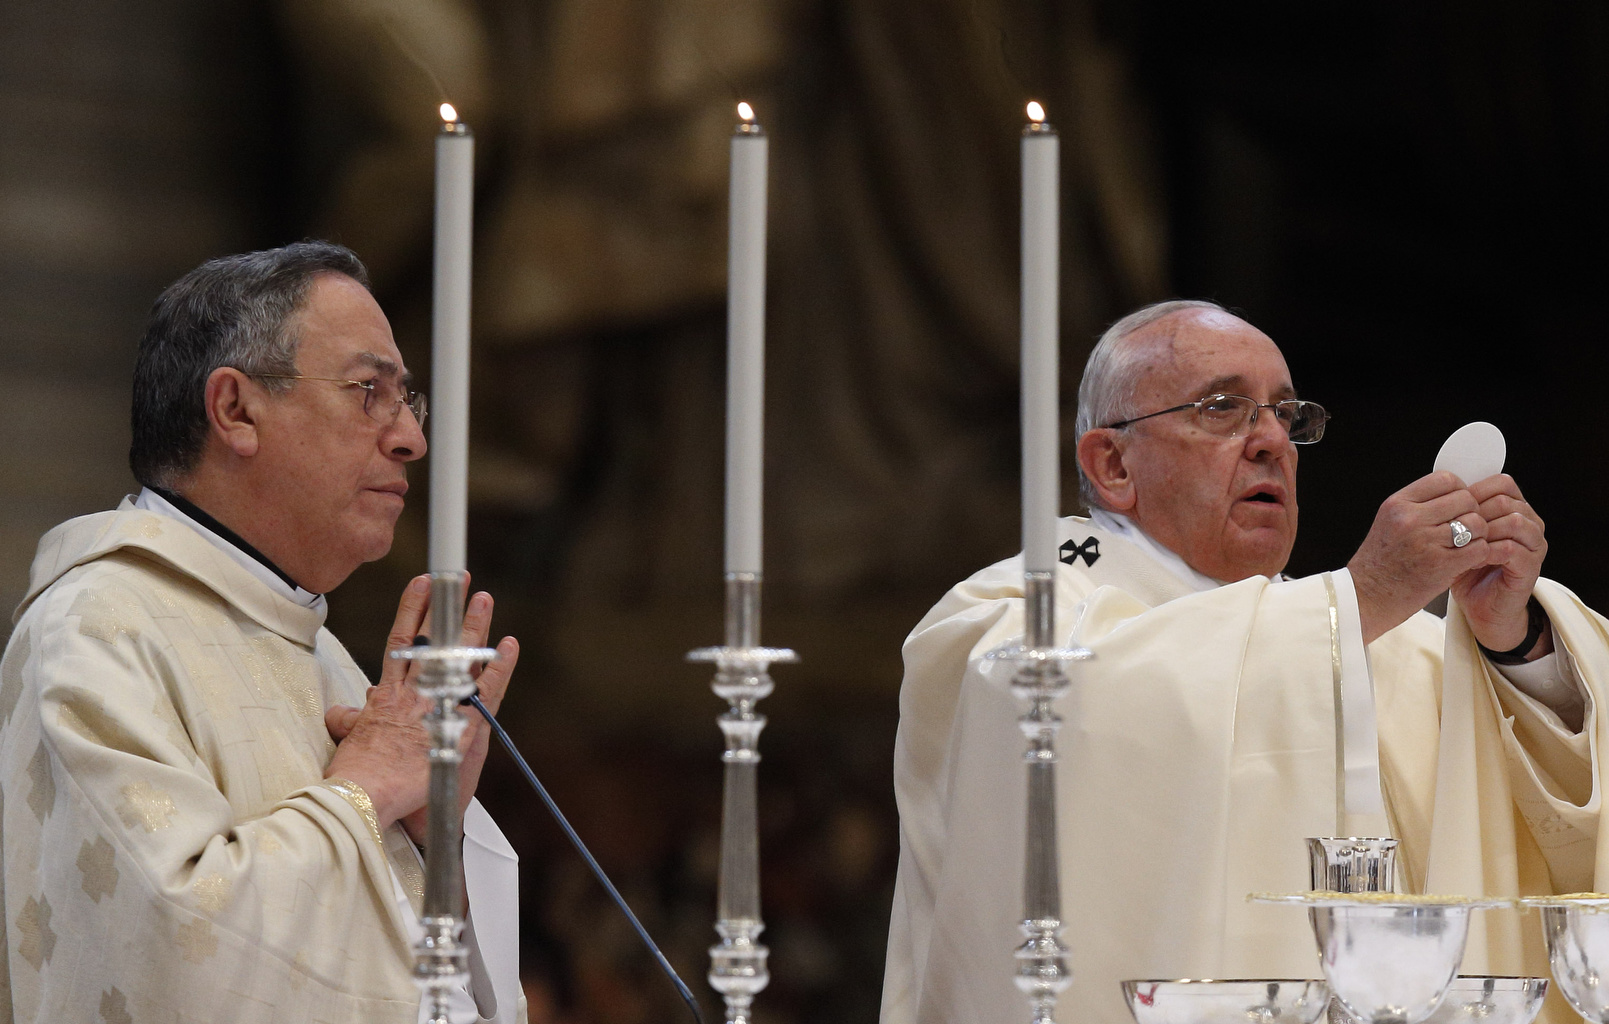 Pope Francis celebrates the Eucharist during a Mass for the opening of the general assembly of Caritas Internationalis in St. Peter's Basilica at the Vatican May 12. At left is Cardinal Oscar Rodriguez Maradiaga of Tegucigalpa, Honduras. (CNS/Paul Haring)